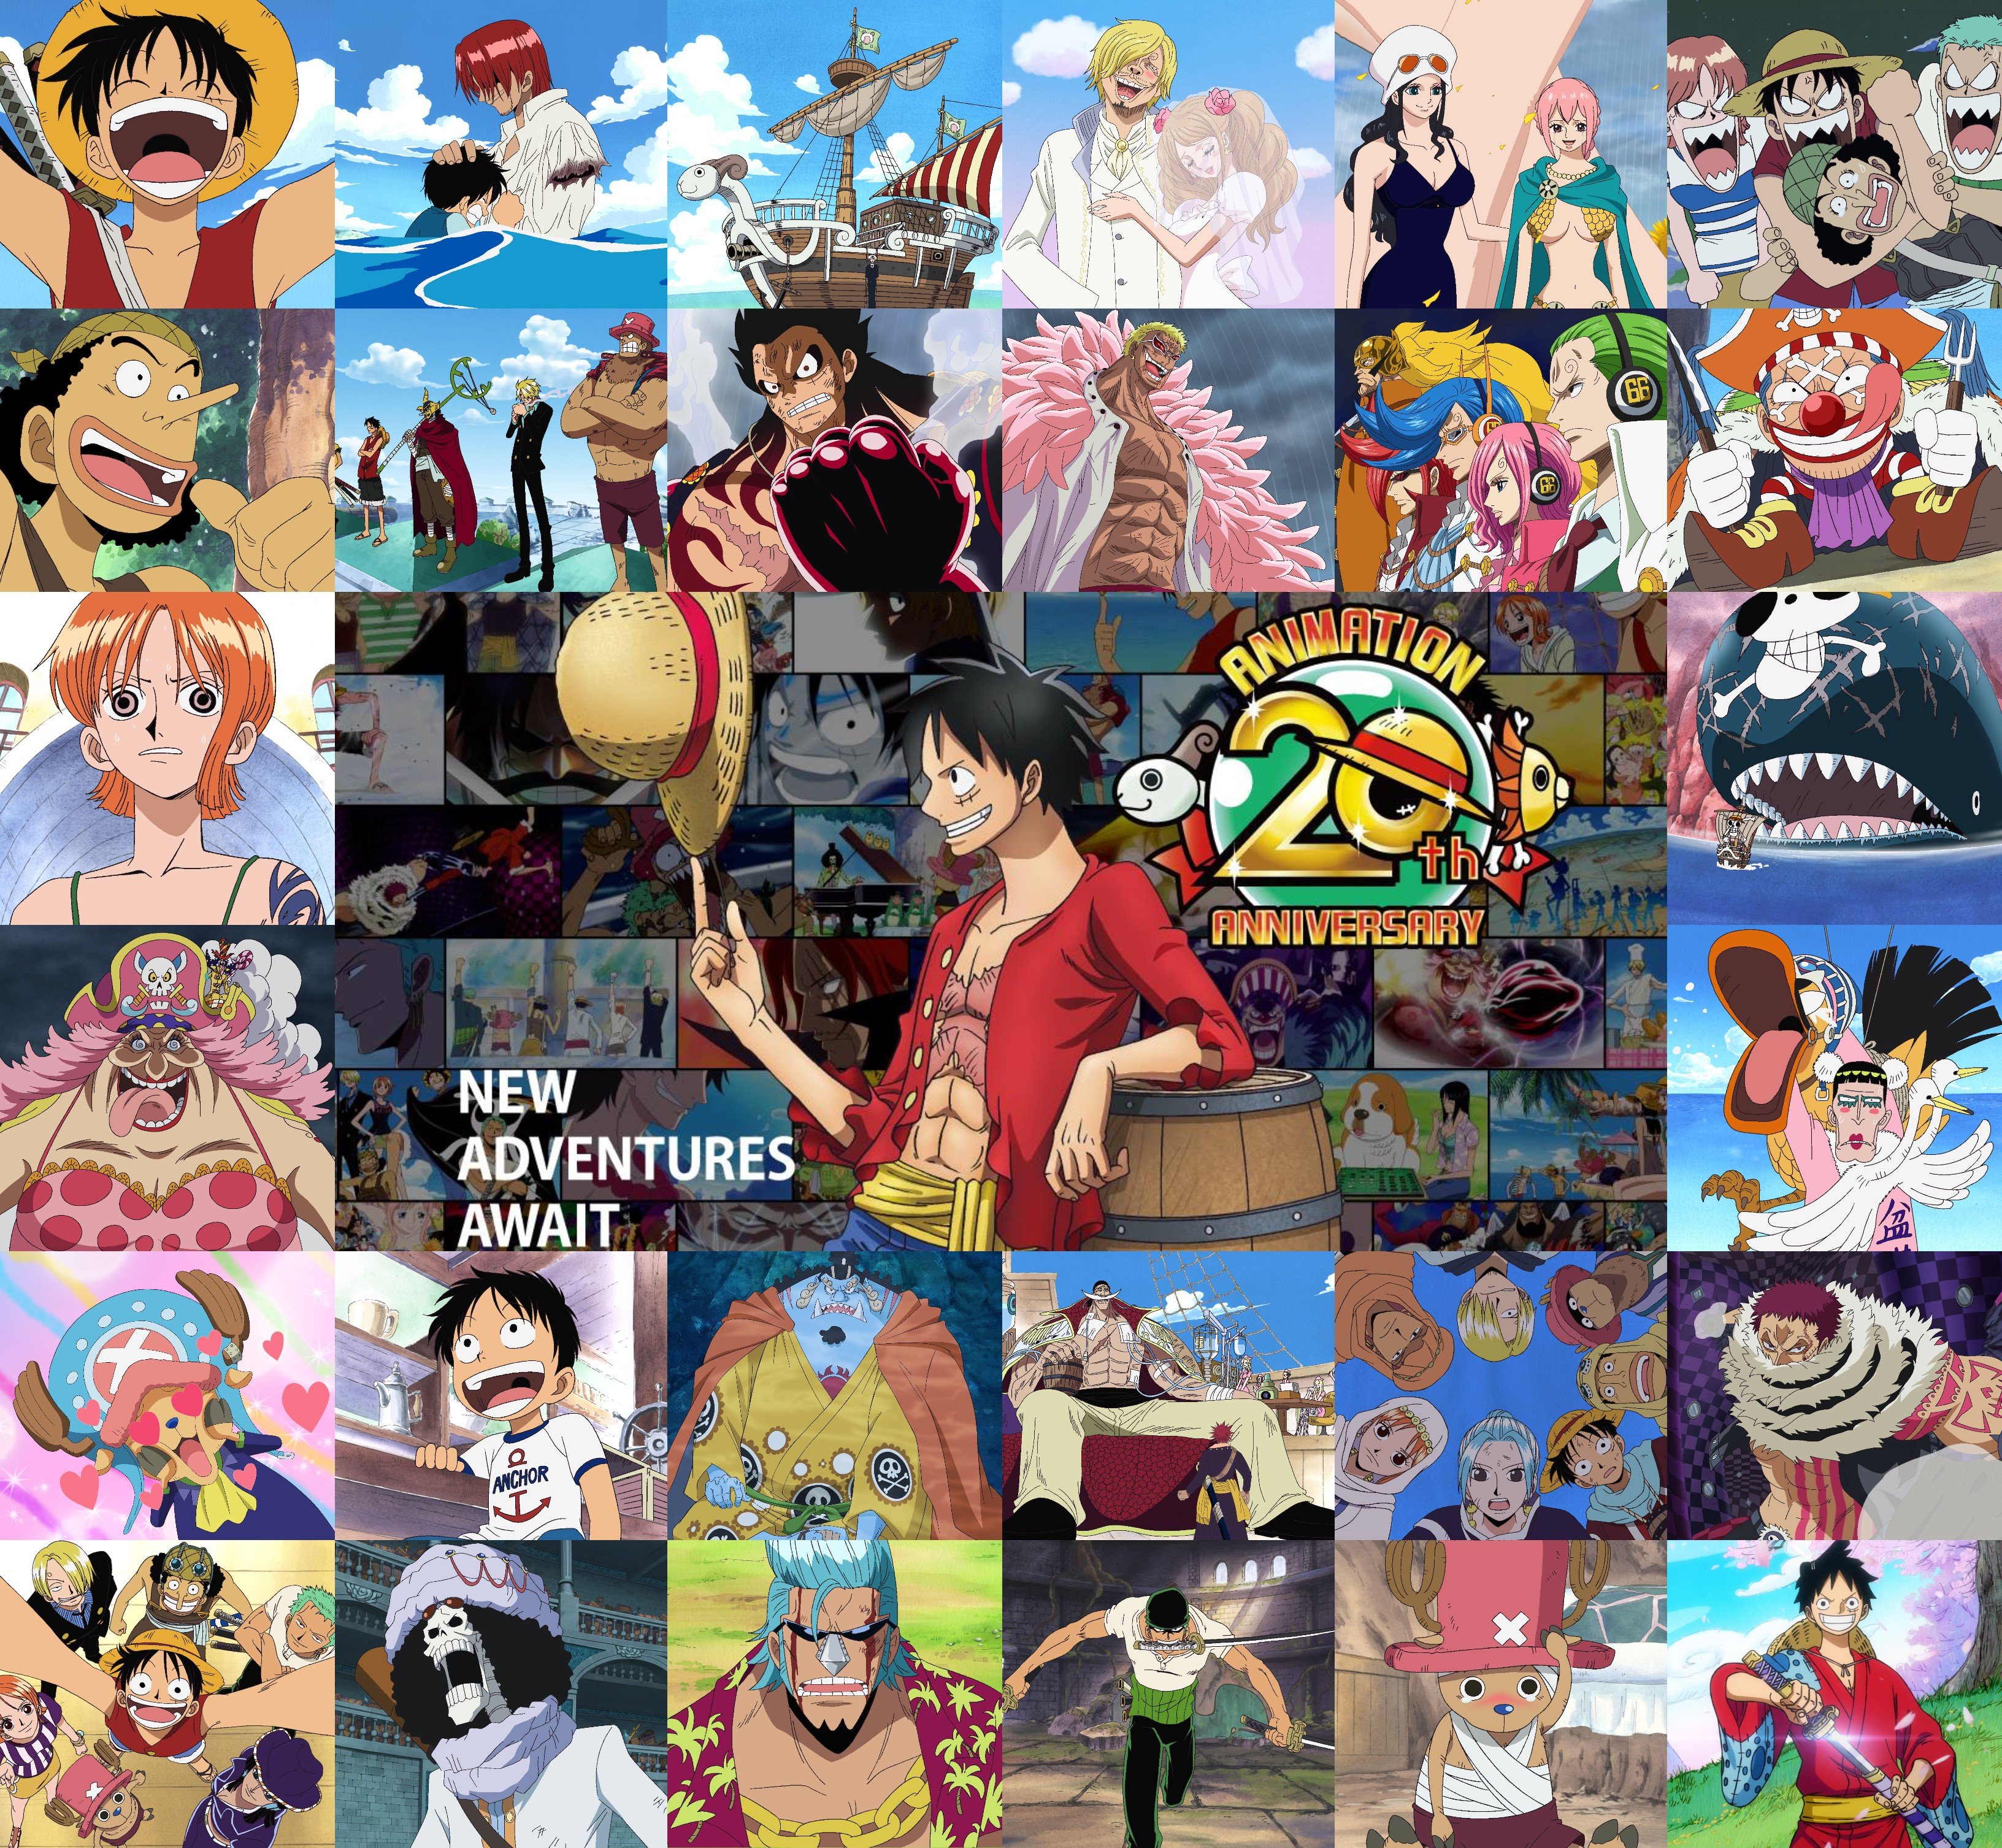 Toei Animation - So many grand adventures for the Straw Hats